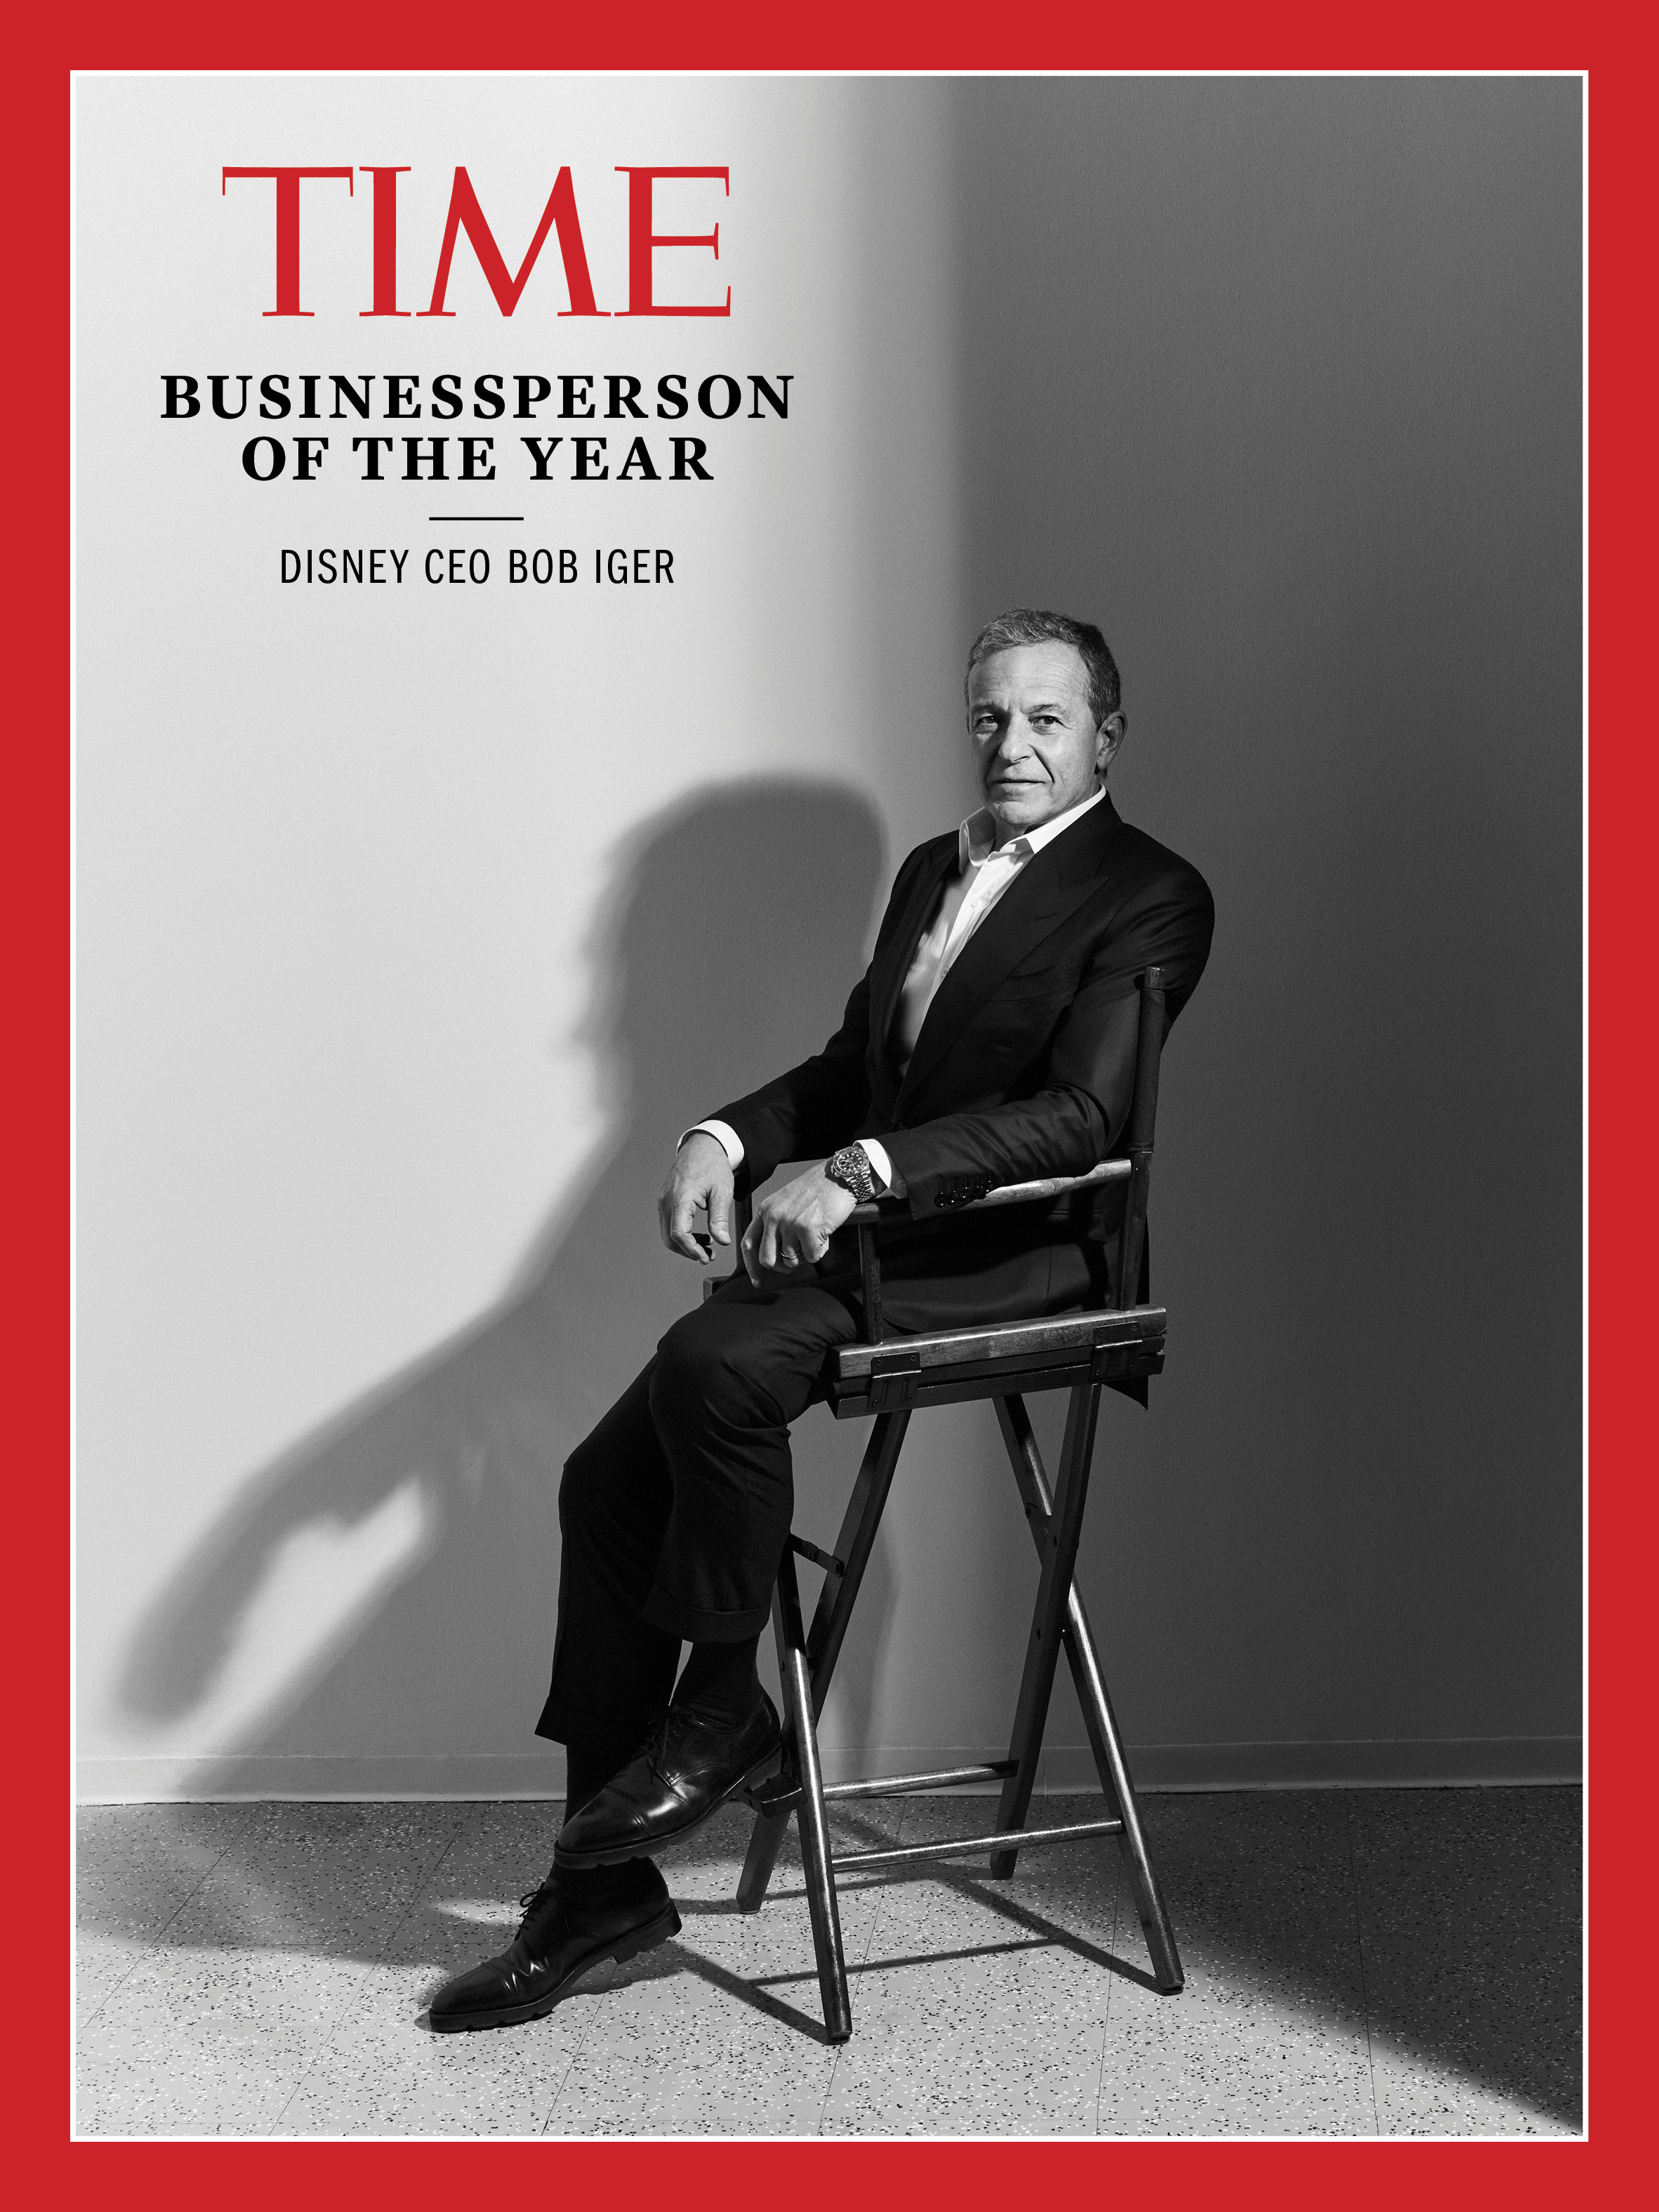 Disney CEO Bob Iger: TIME&#39;s Businessperson of the Year 2019 | Time